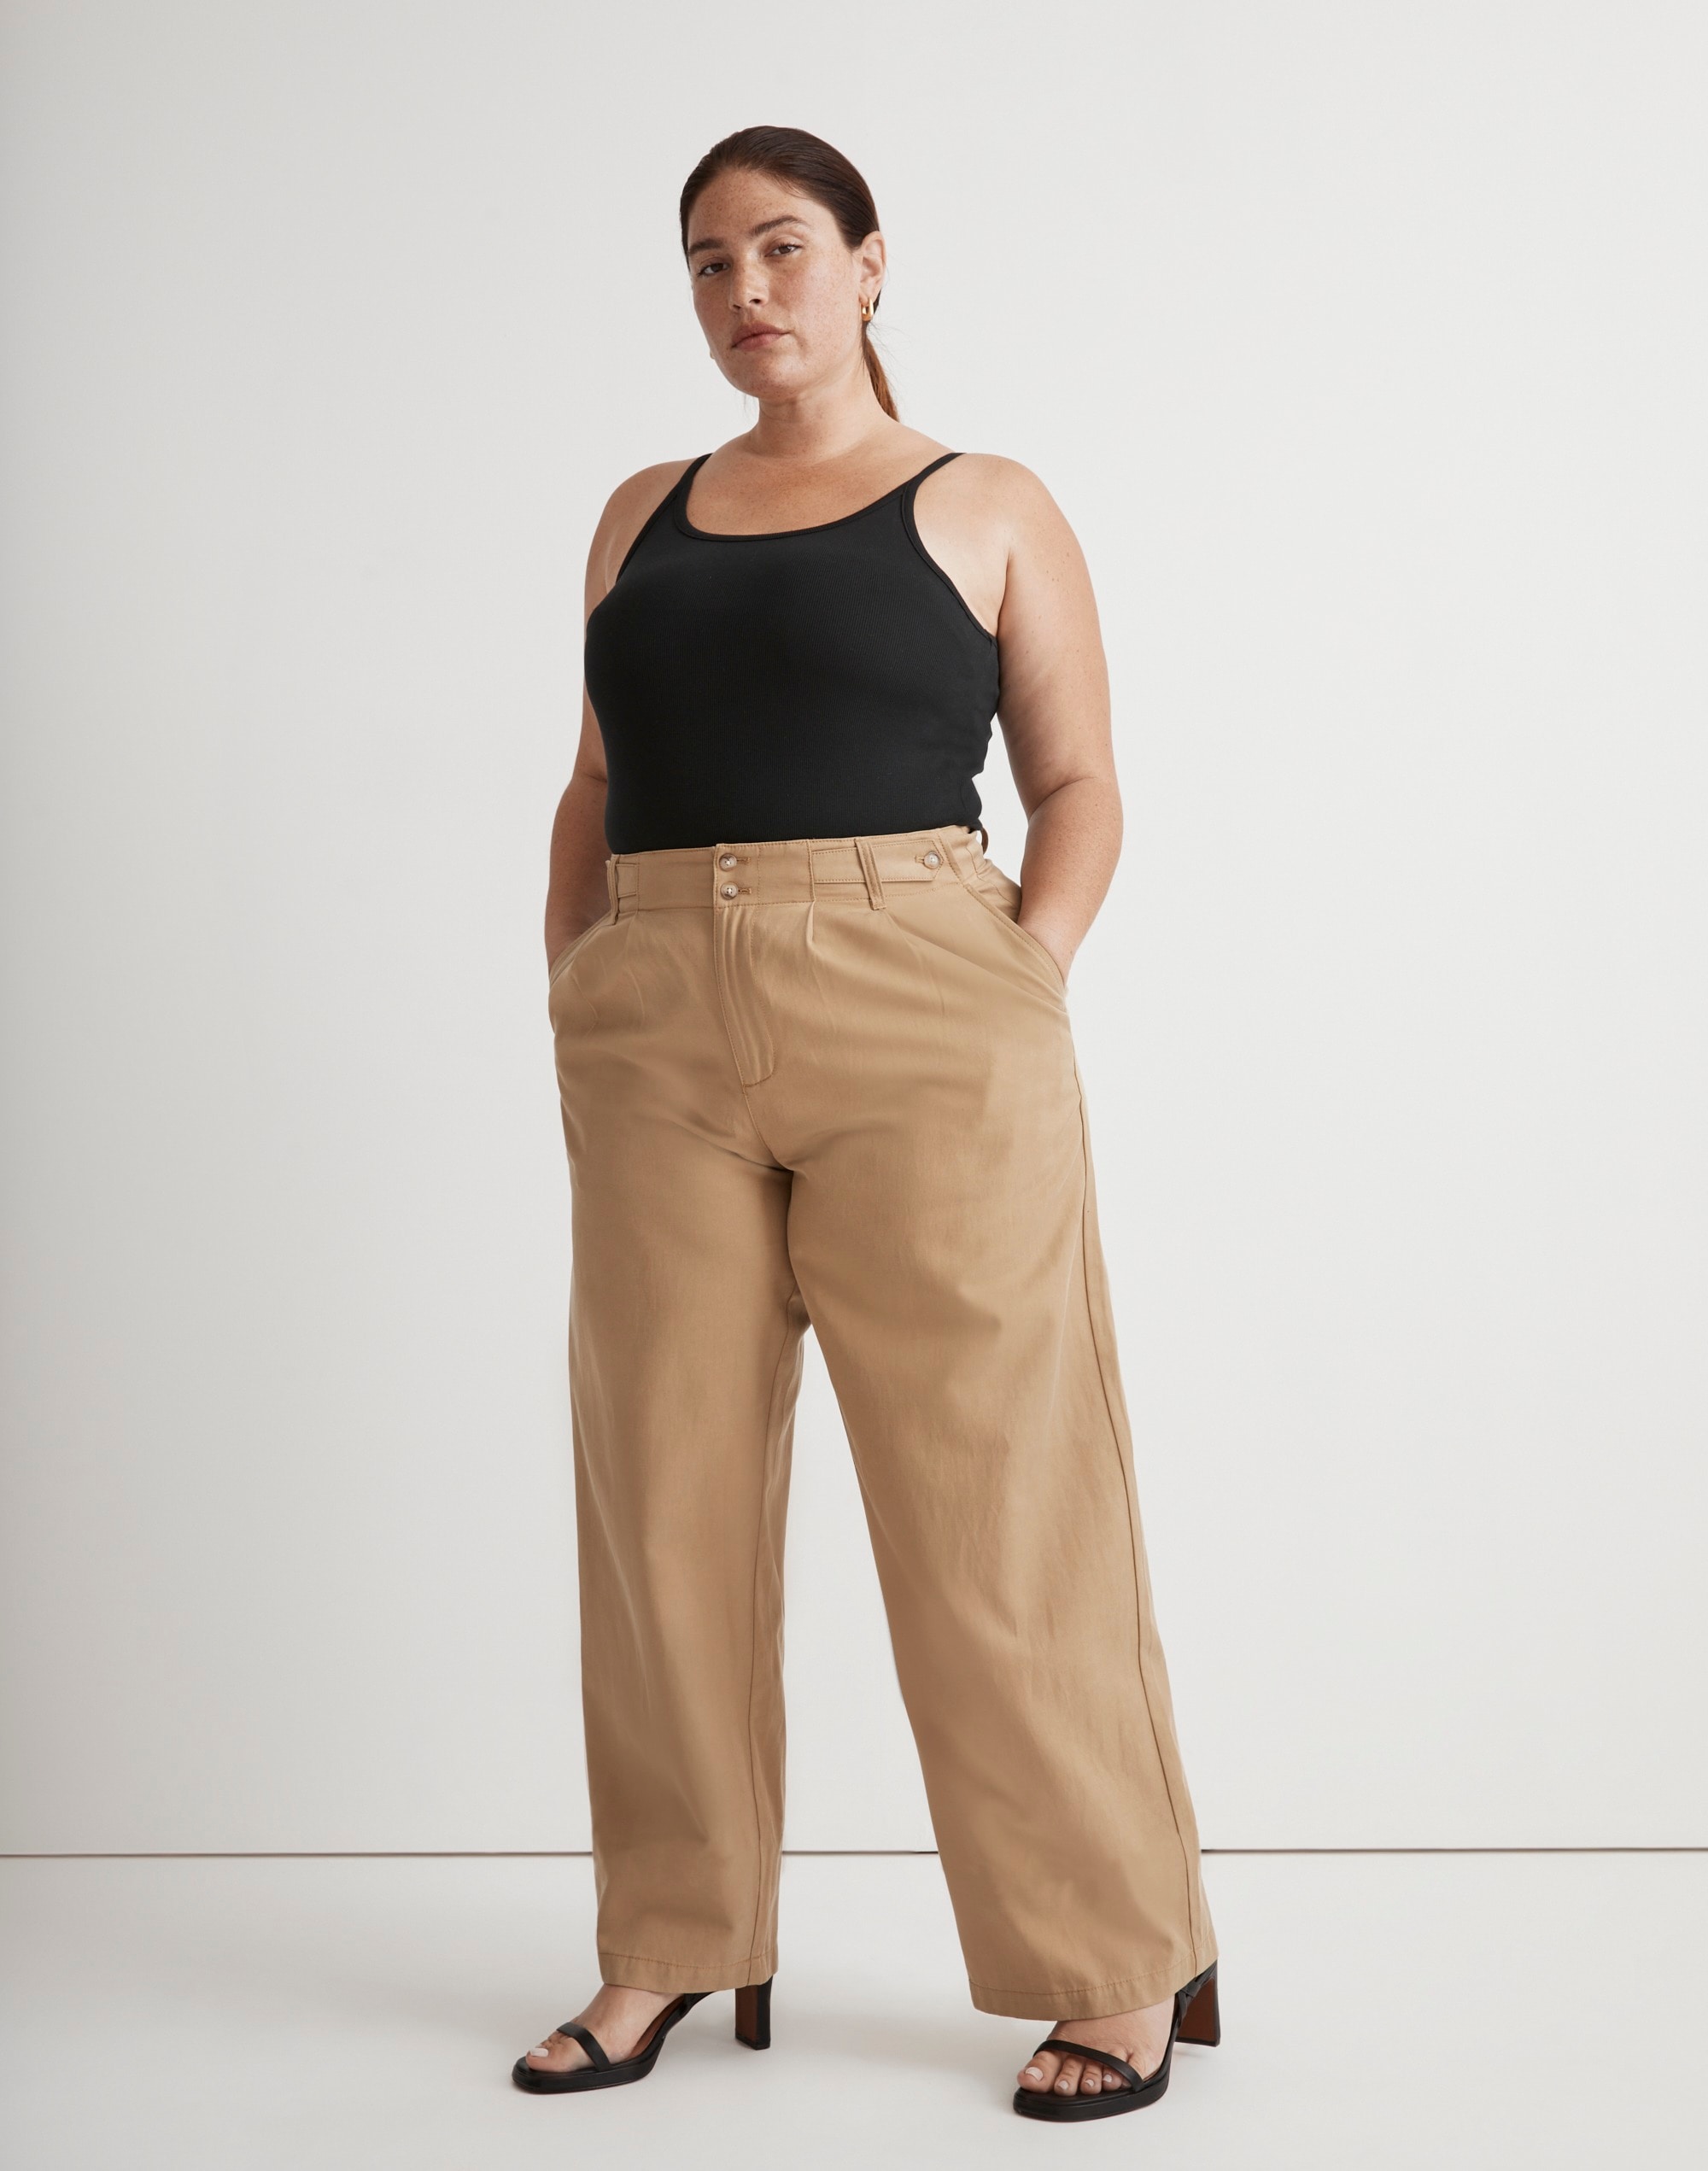 6 ways to wear Madewell's Harlow wide leg pants. Really love the khaki  meets trouser vibe of these. They're also so comfy! Save thi